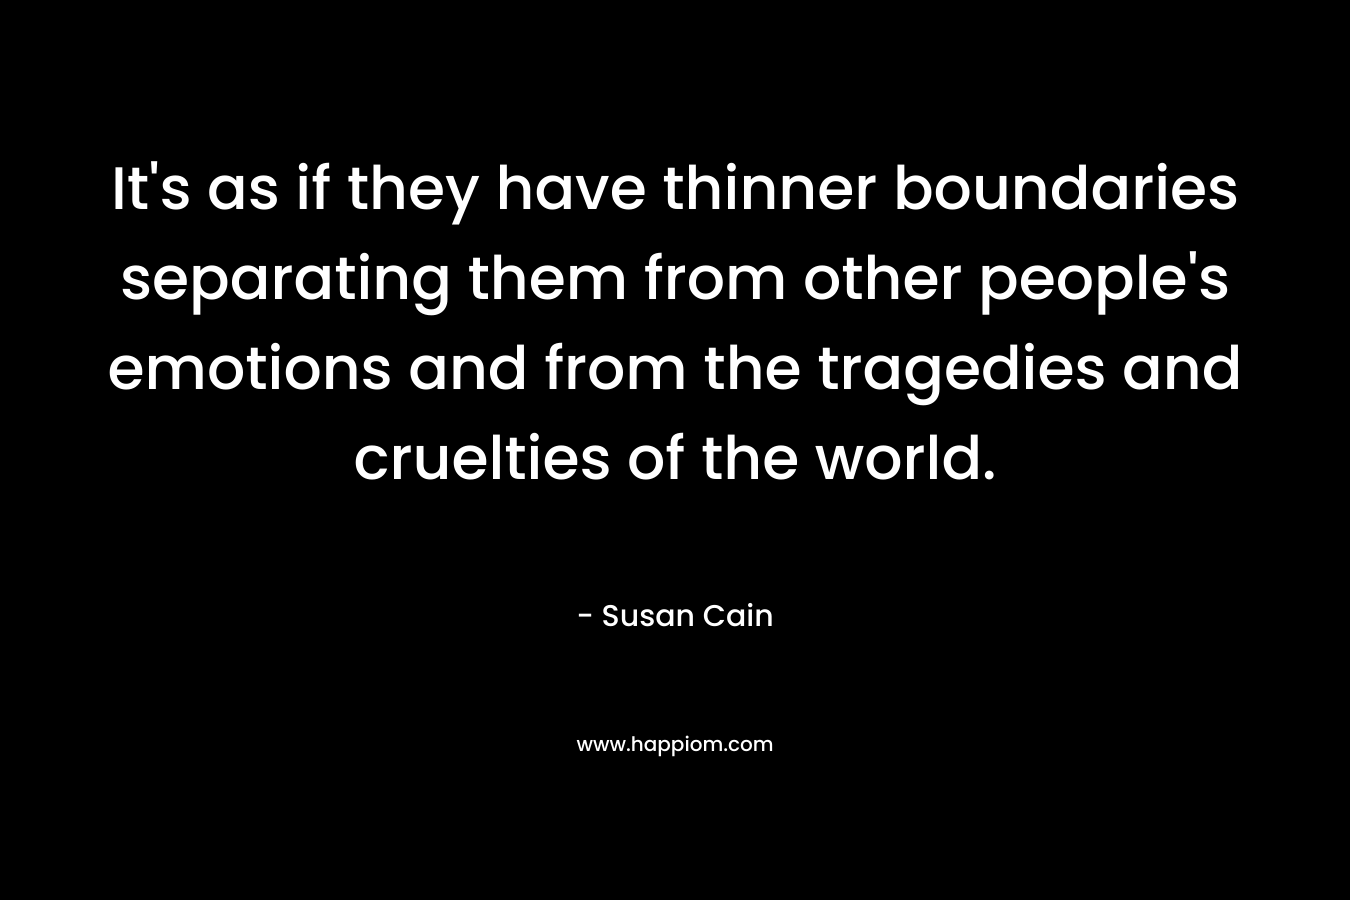 It’s as if they have thinner boundaries separating them from other people’s emotions and from the tragedies and cruelties of the world. – Susan Cain